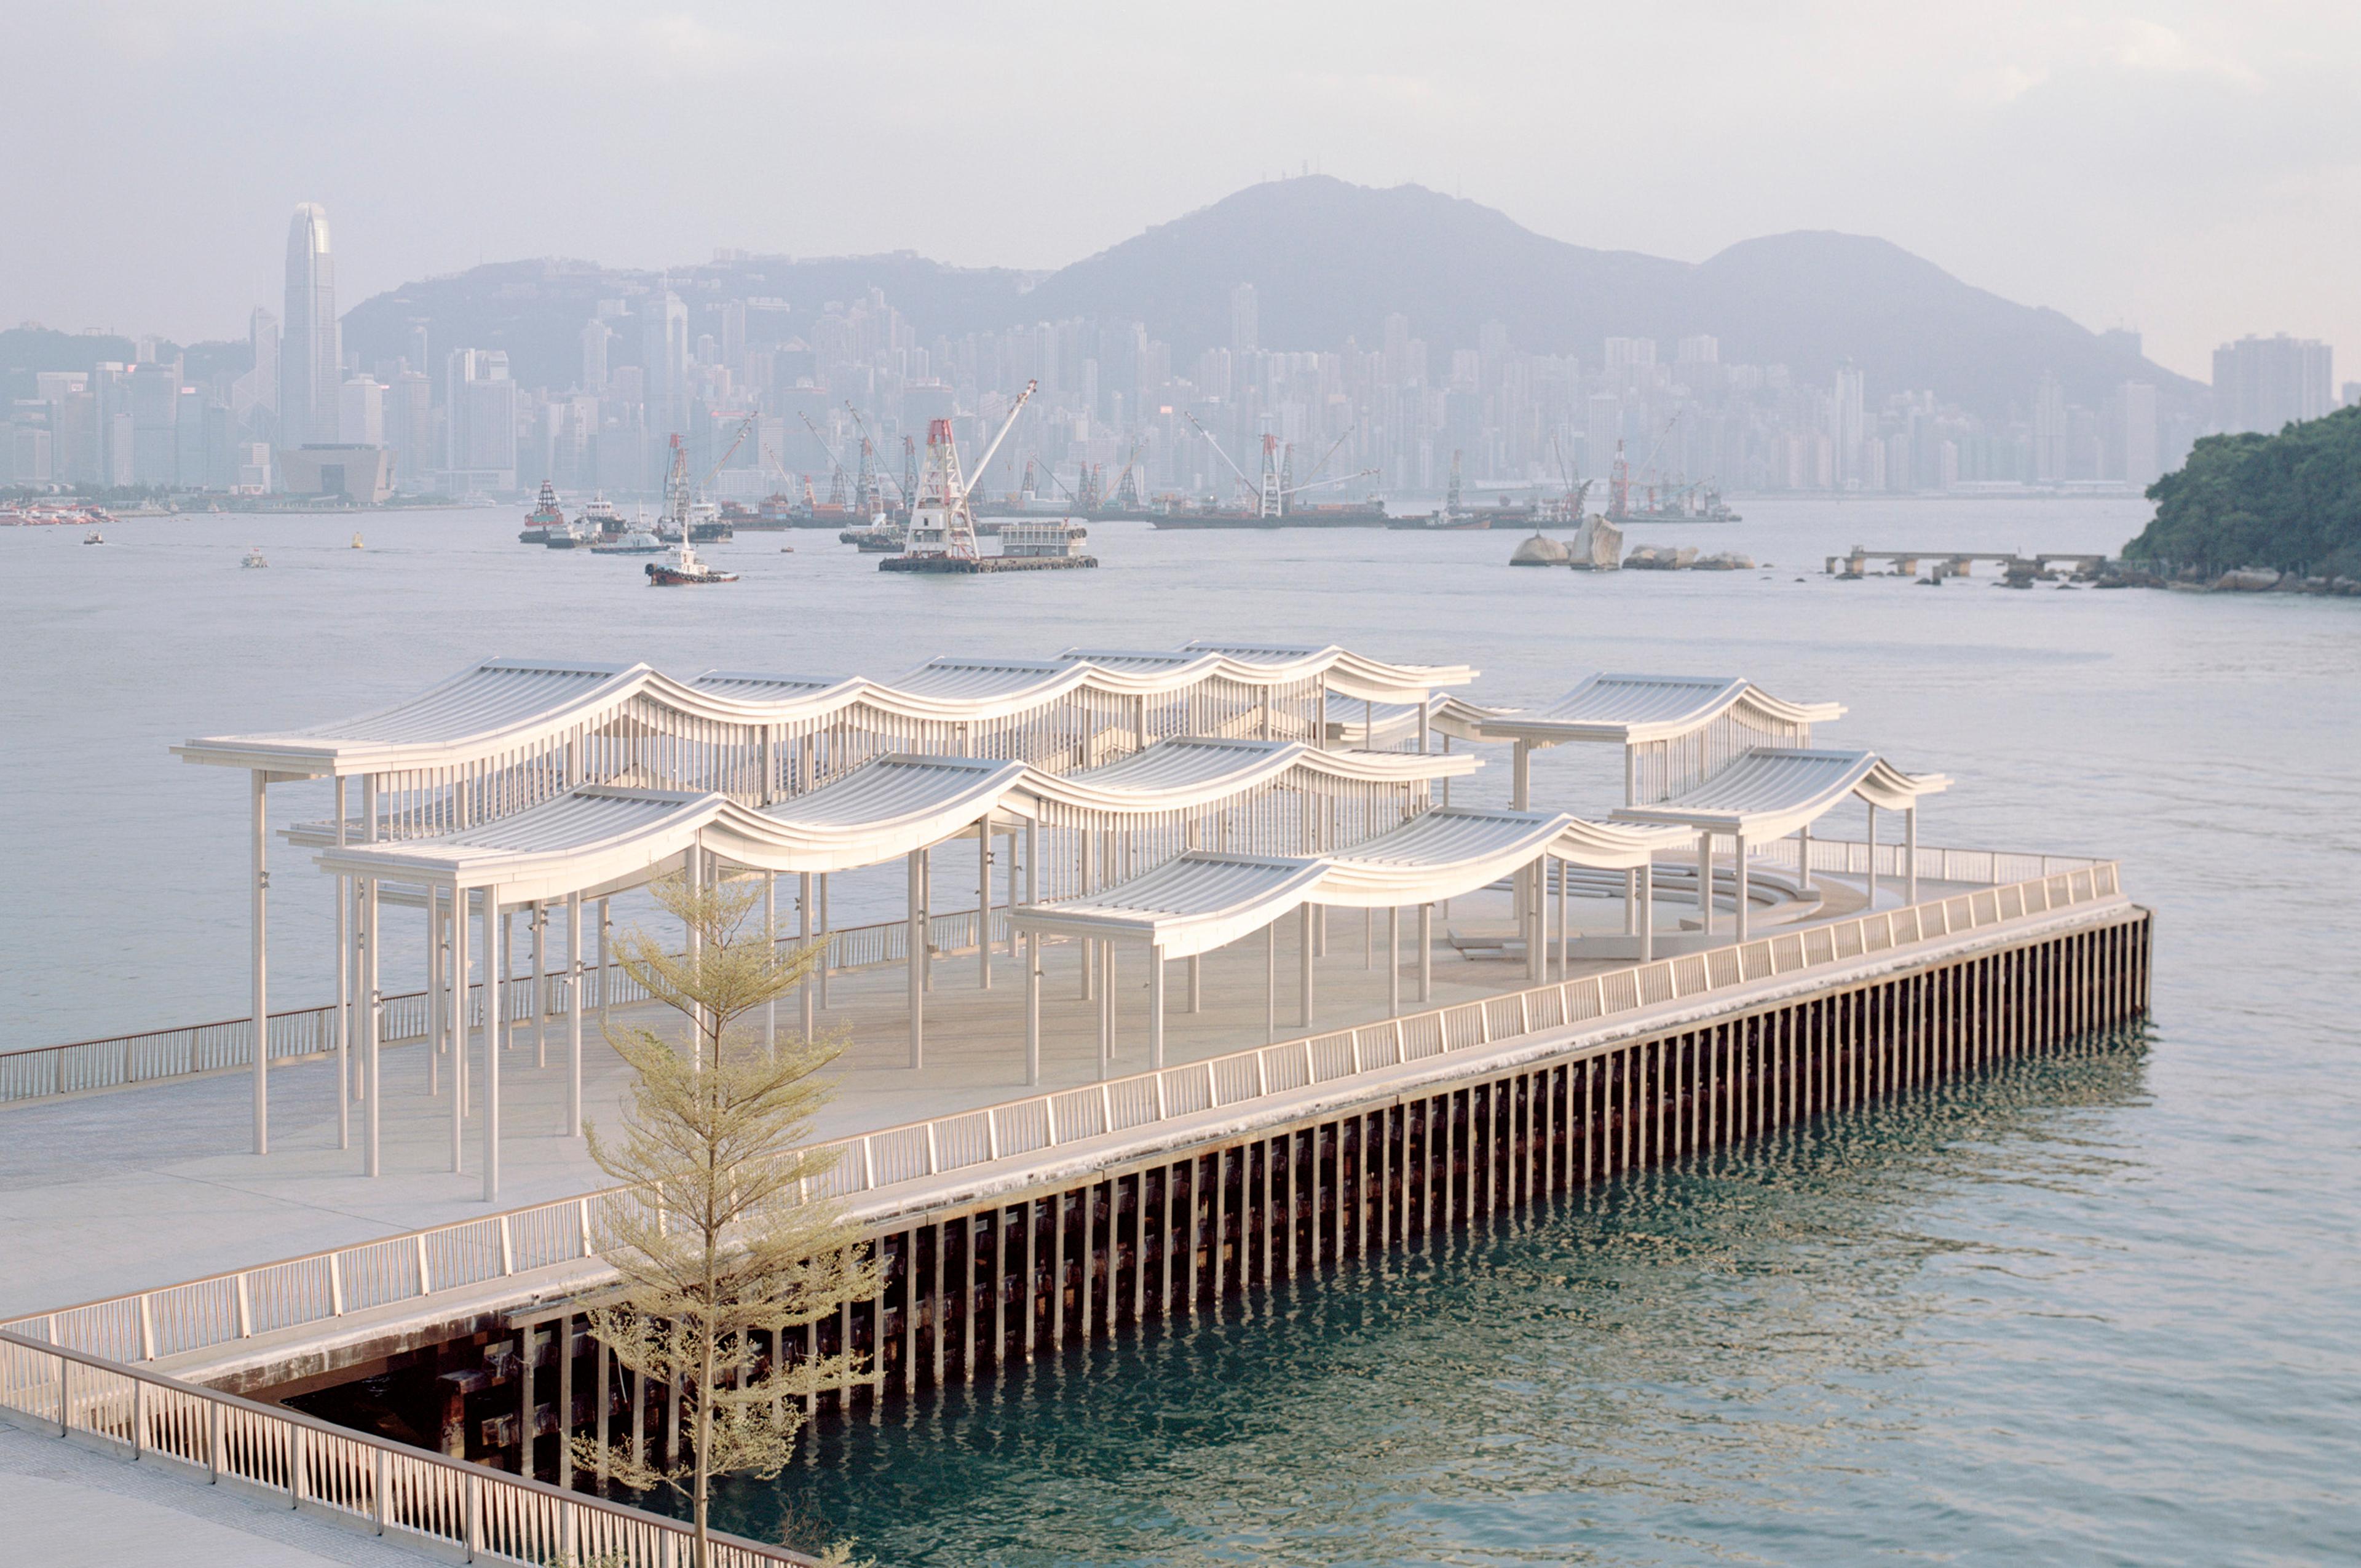 Pier with undulating canopy and Hong Kong skyline in background